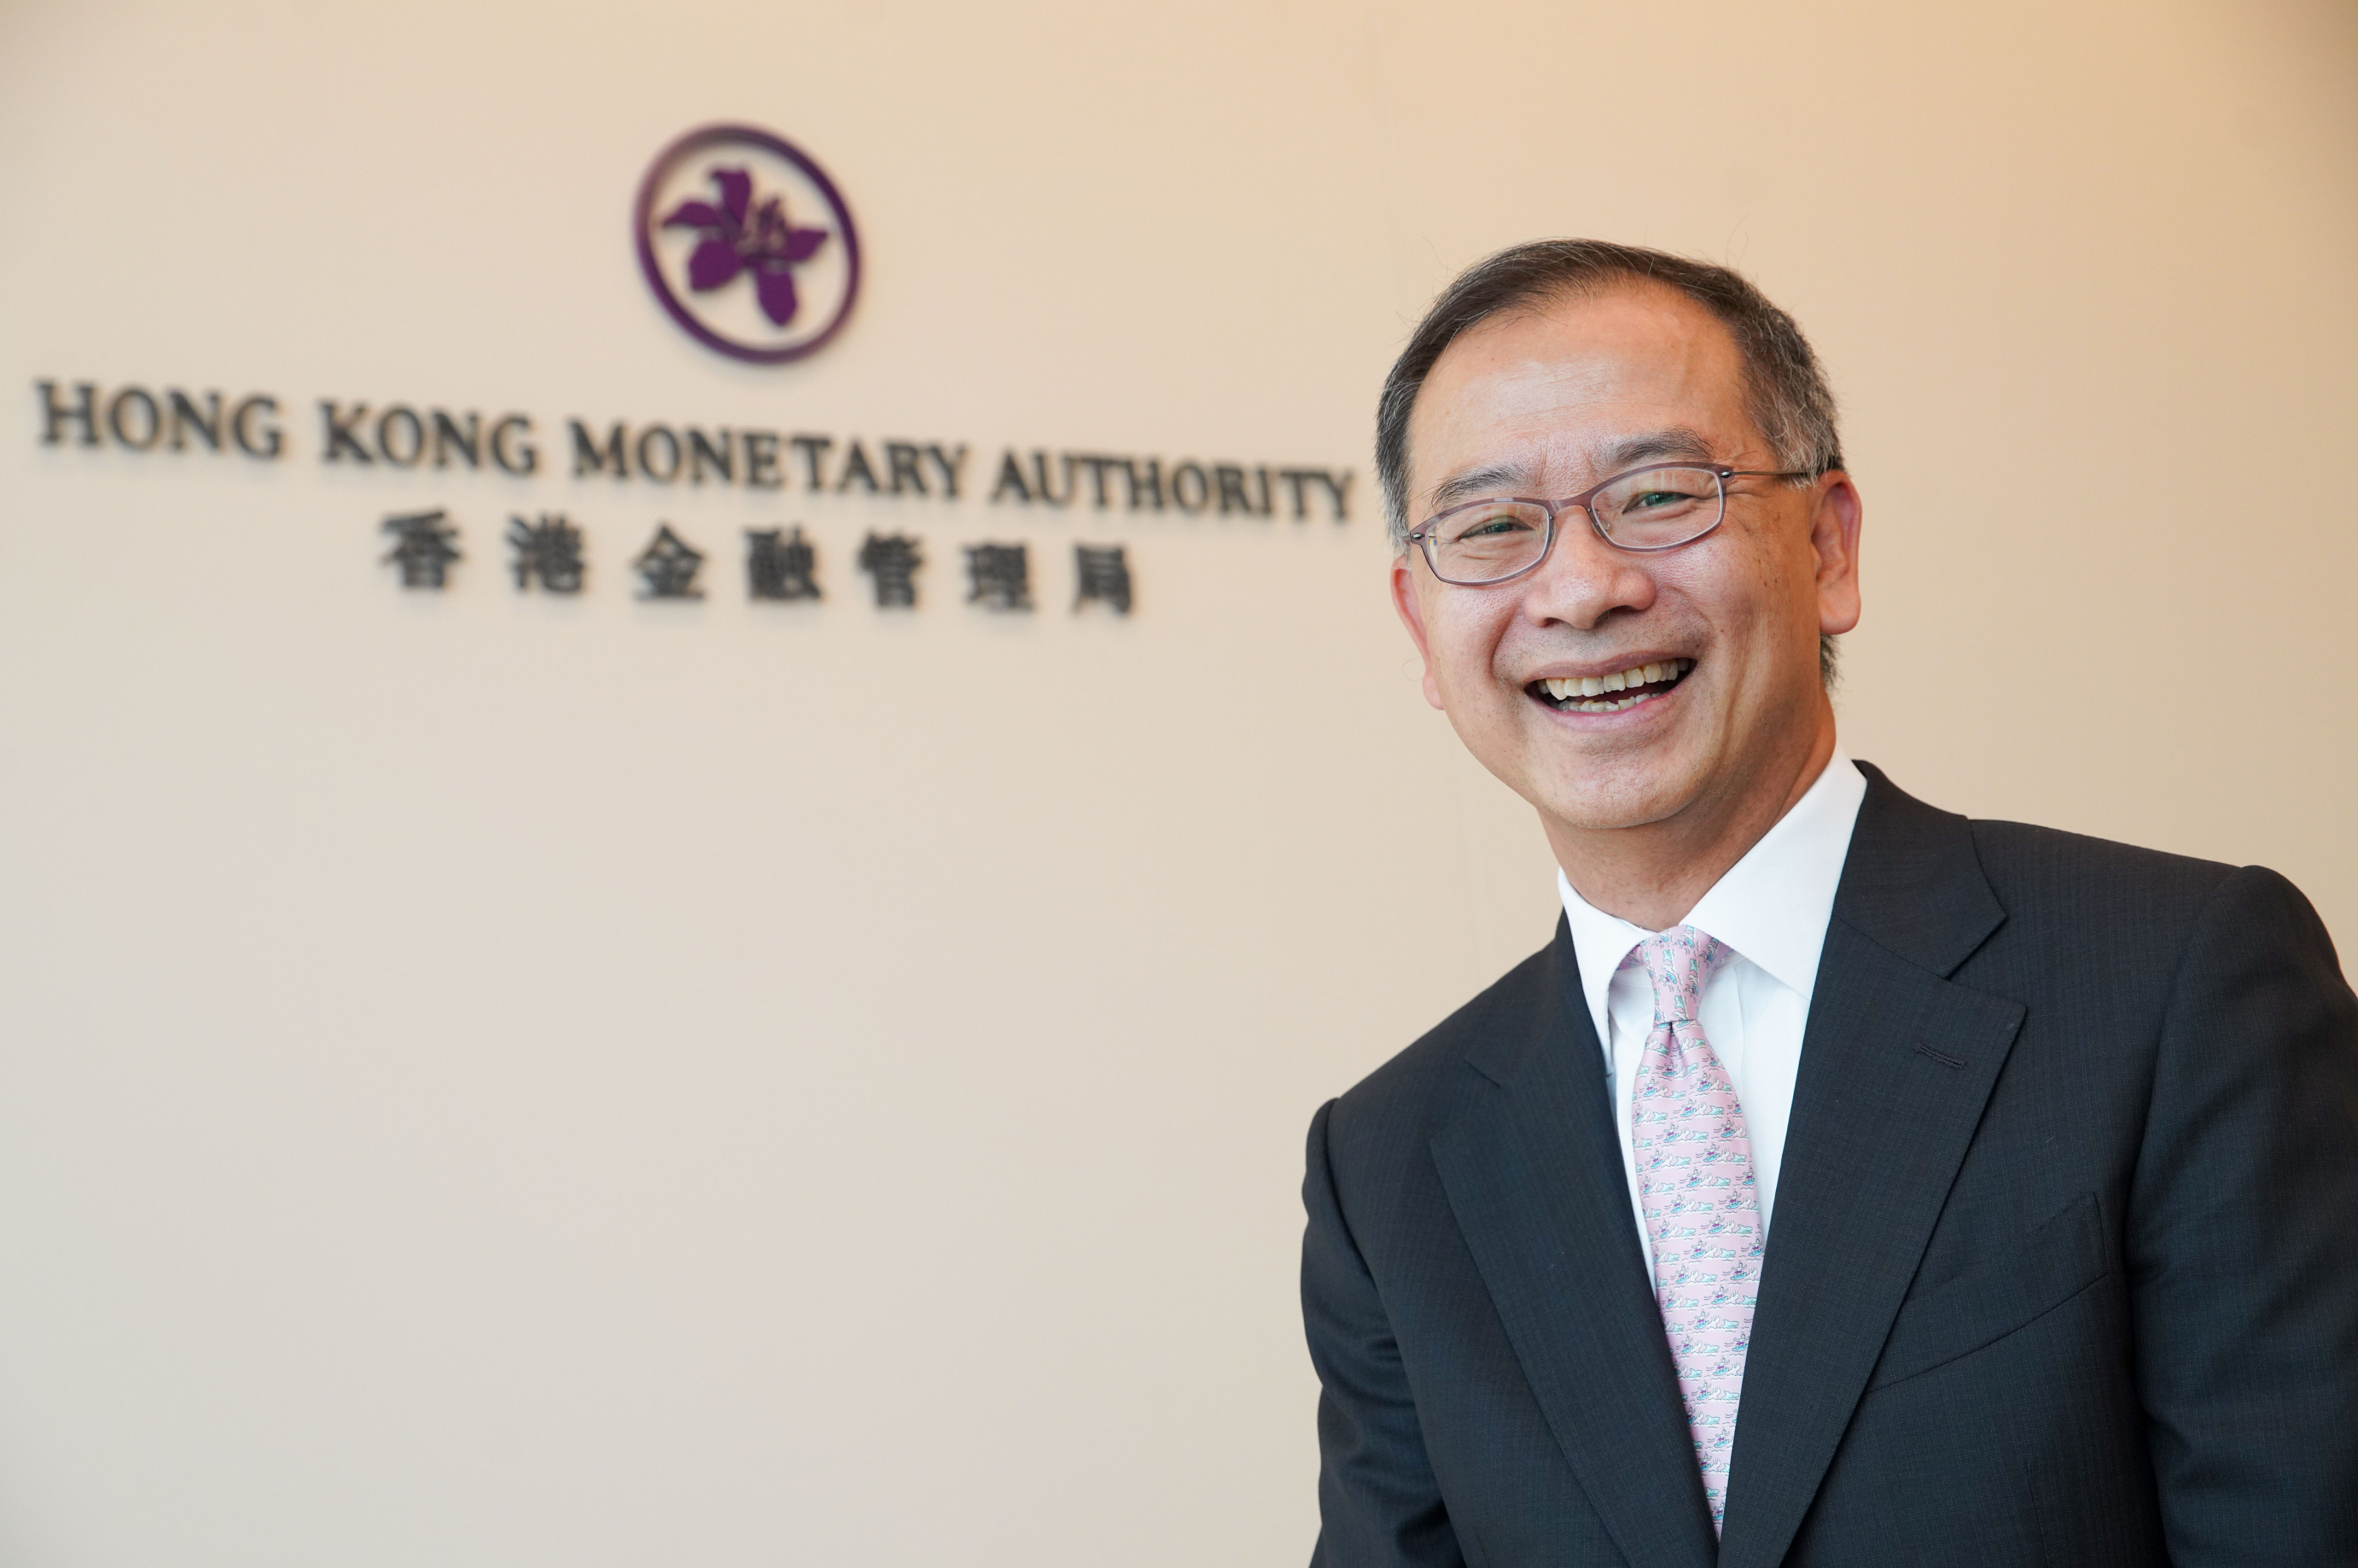 Eddie Yue Wai-man, CEO of Hong Kong Monetary Authority, issued a rare profit warning for the Exchange Fund, the city’s war chest to defend the local currency from attacks by short sellers. Photo: Winson Wong